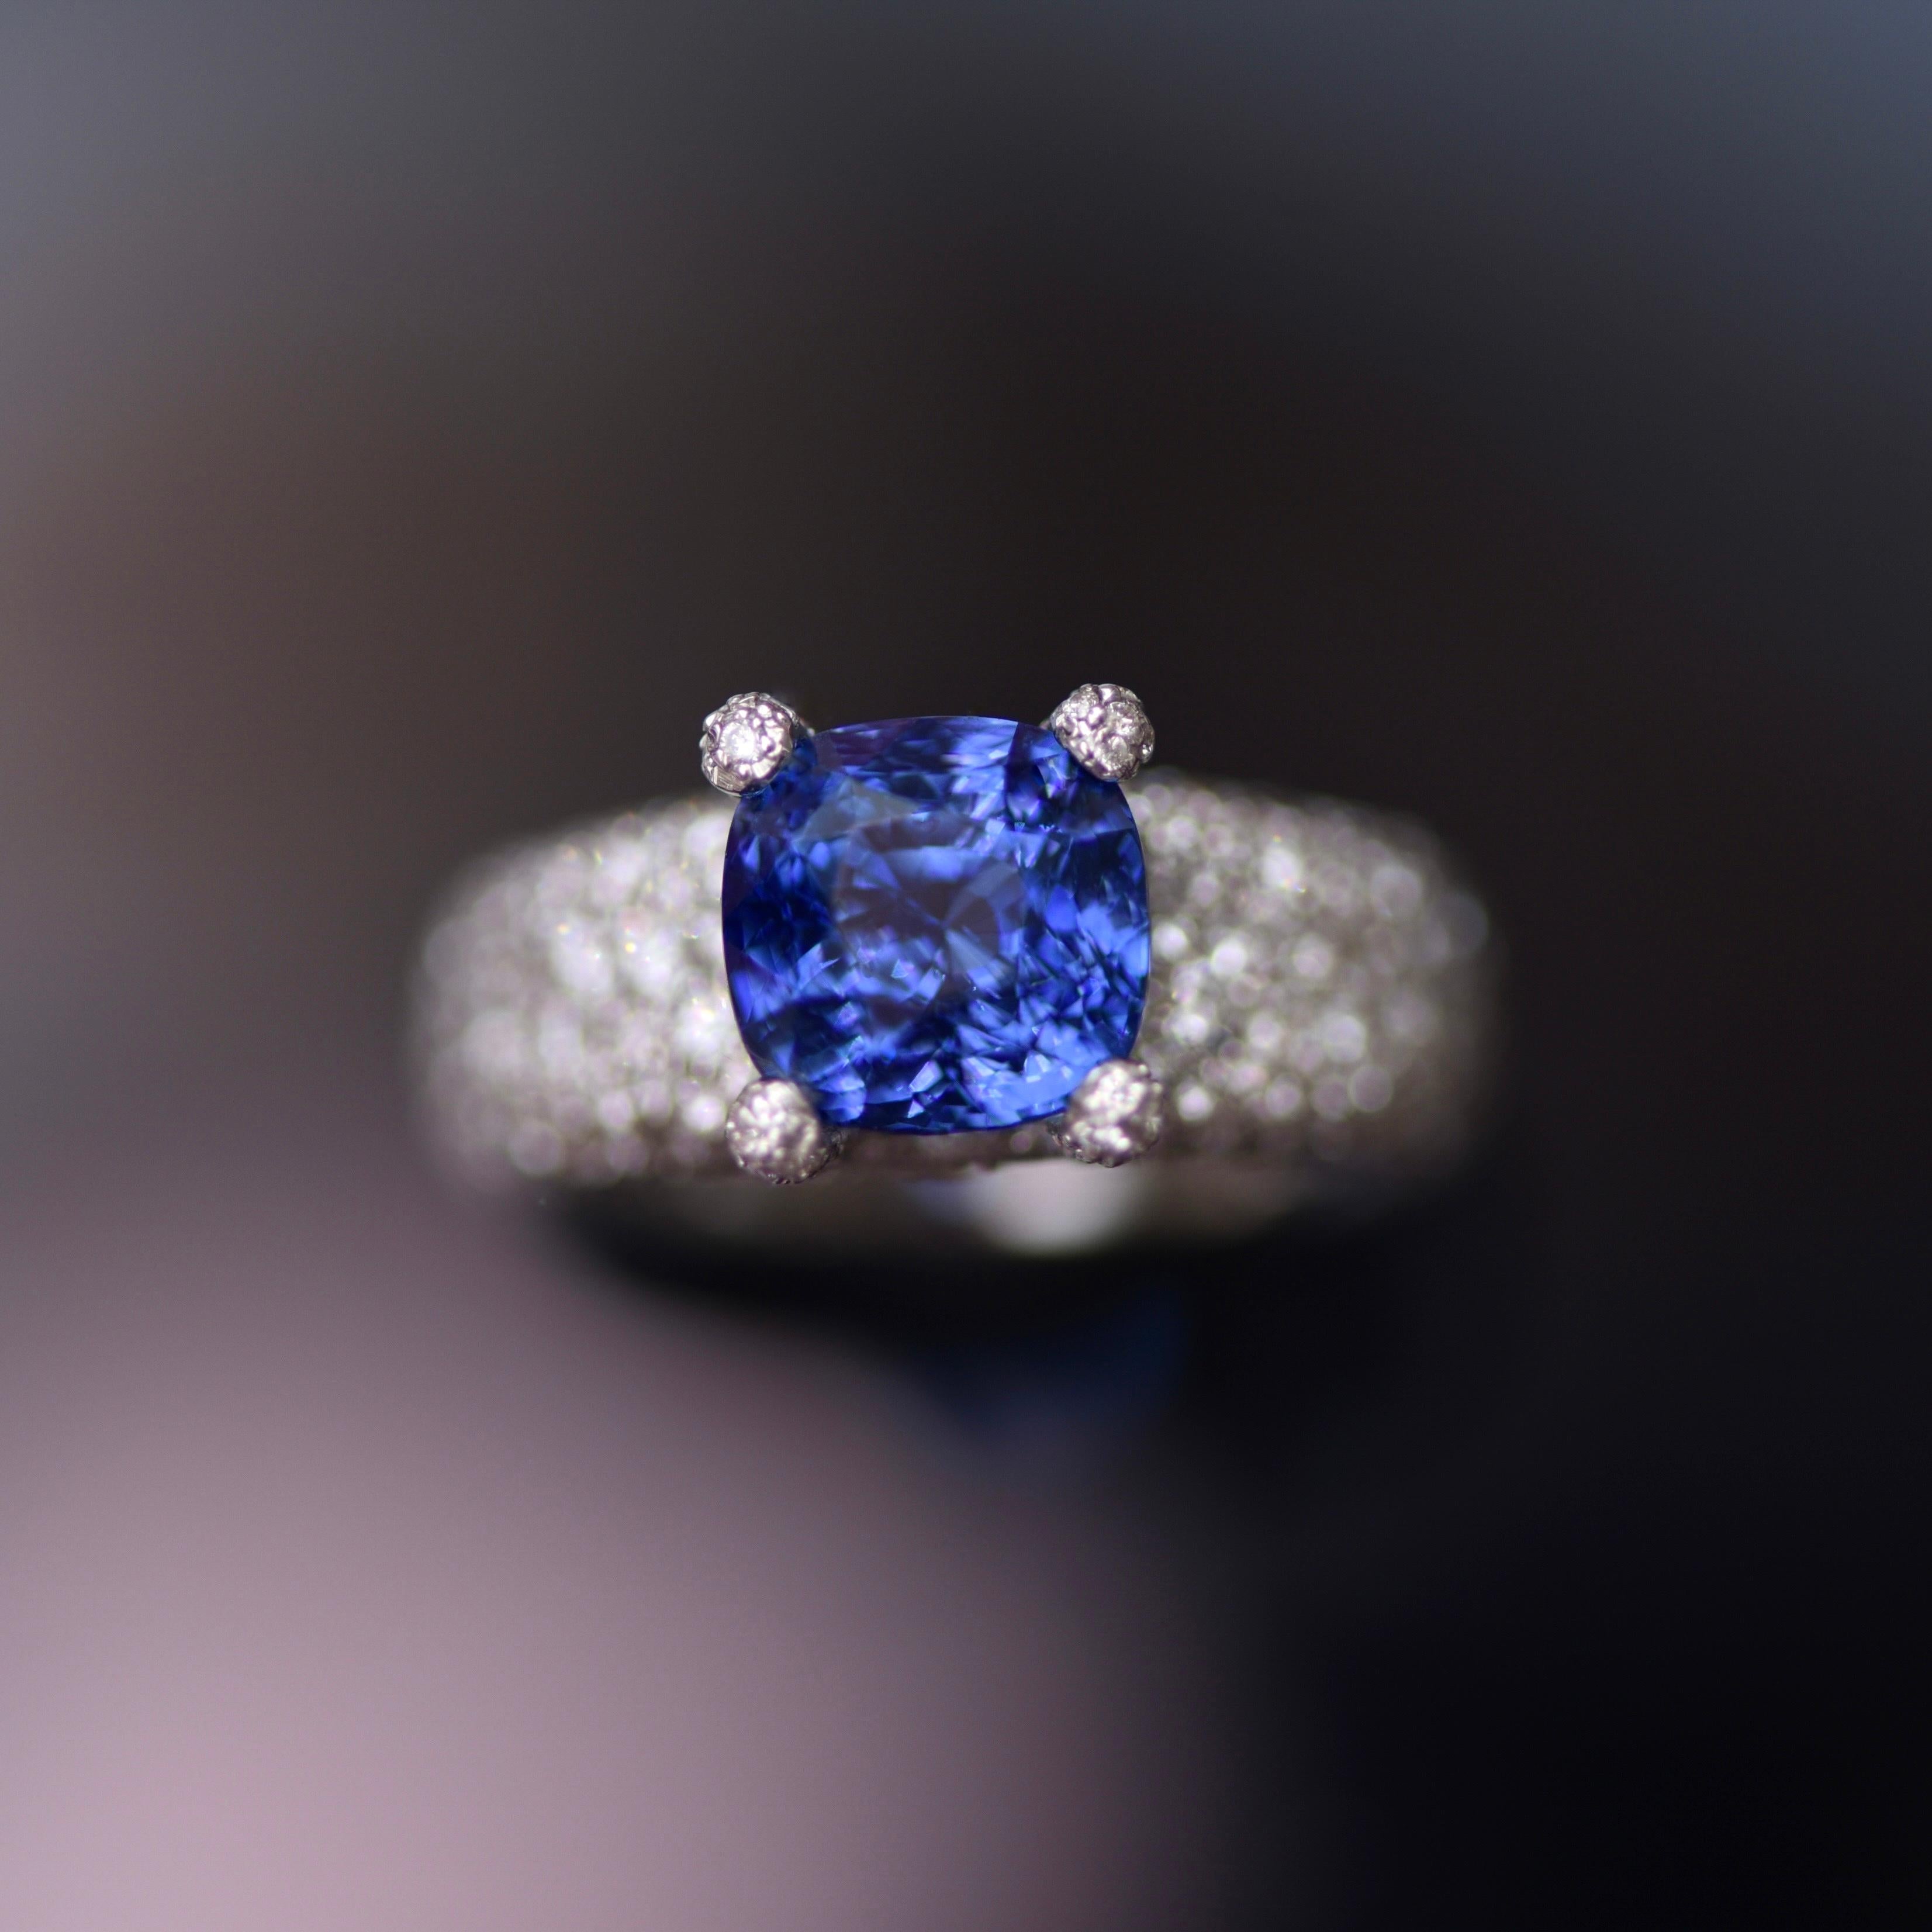 5.08 Carat Natural Sapphire Diamonds 18 Karat White Gold Cocktail Ring by D&A In New Condition For Sale In Singapore, SG